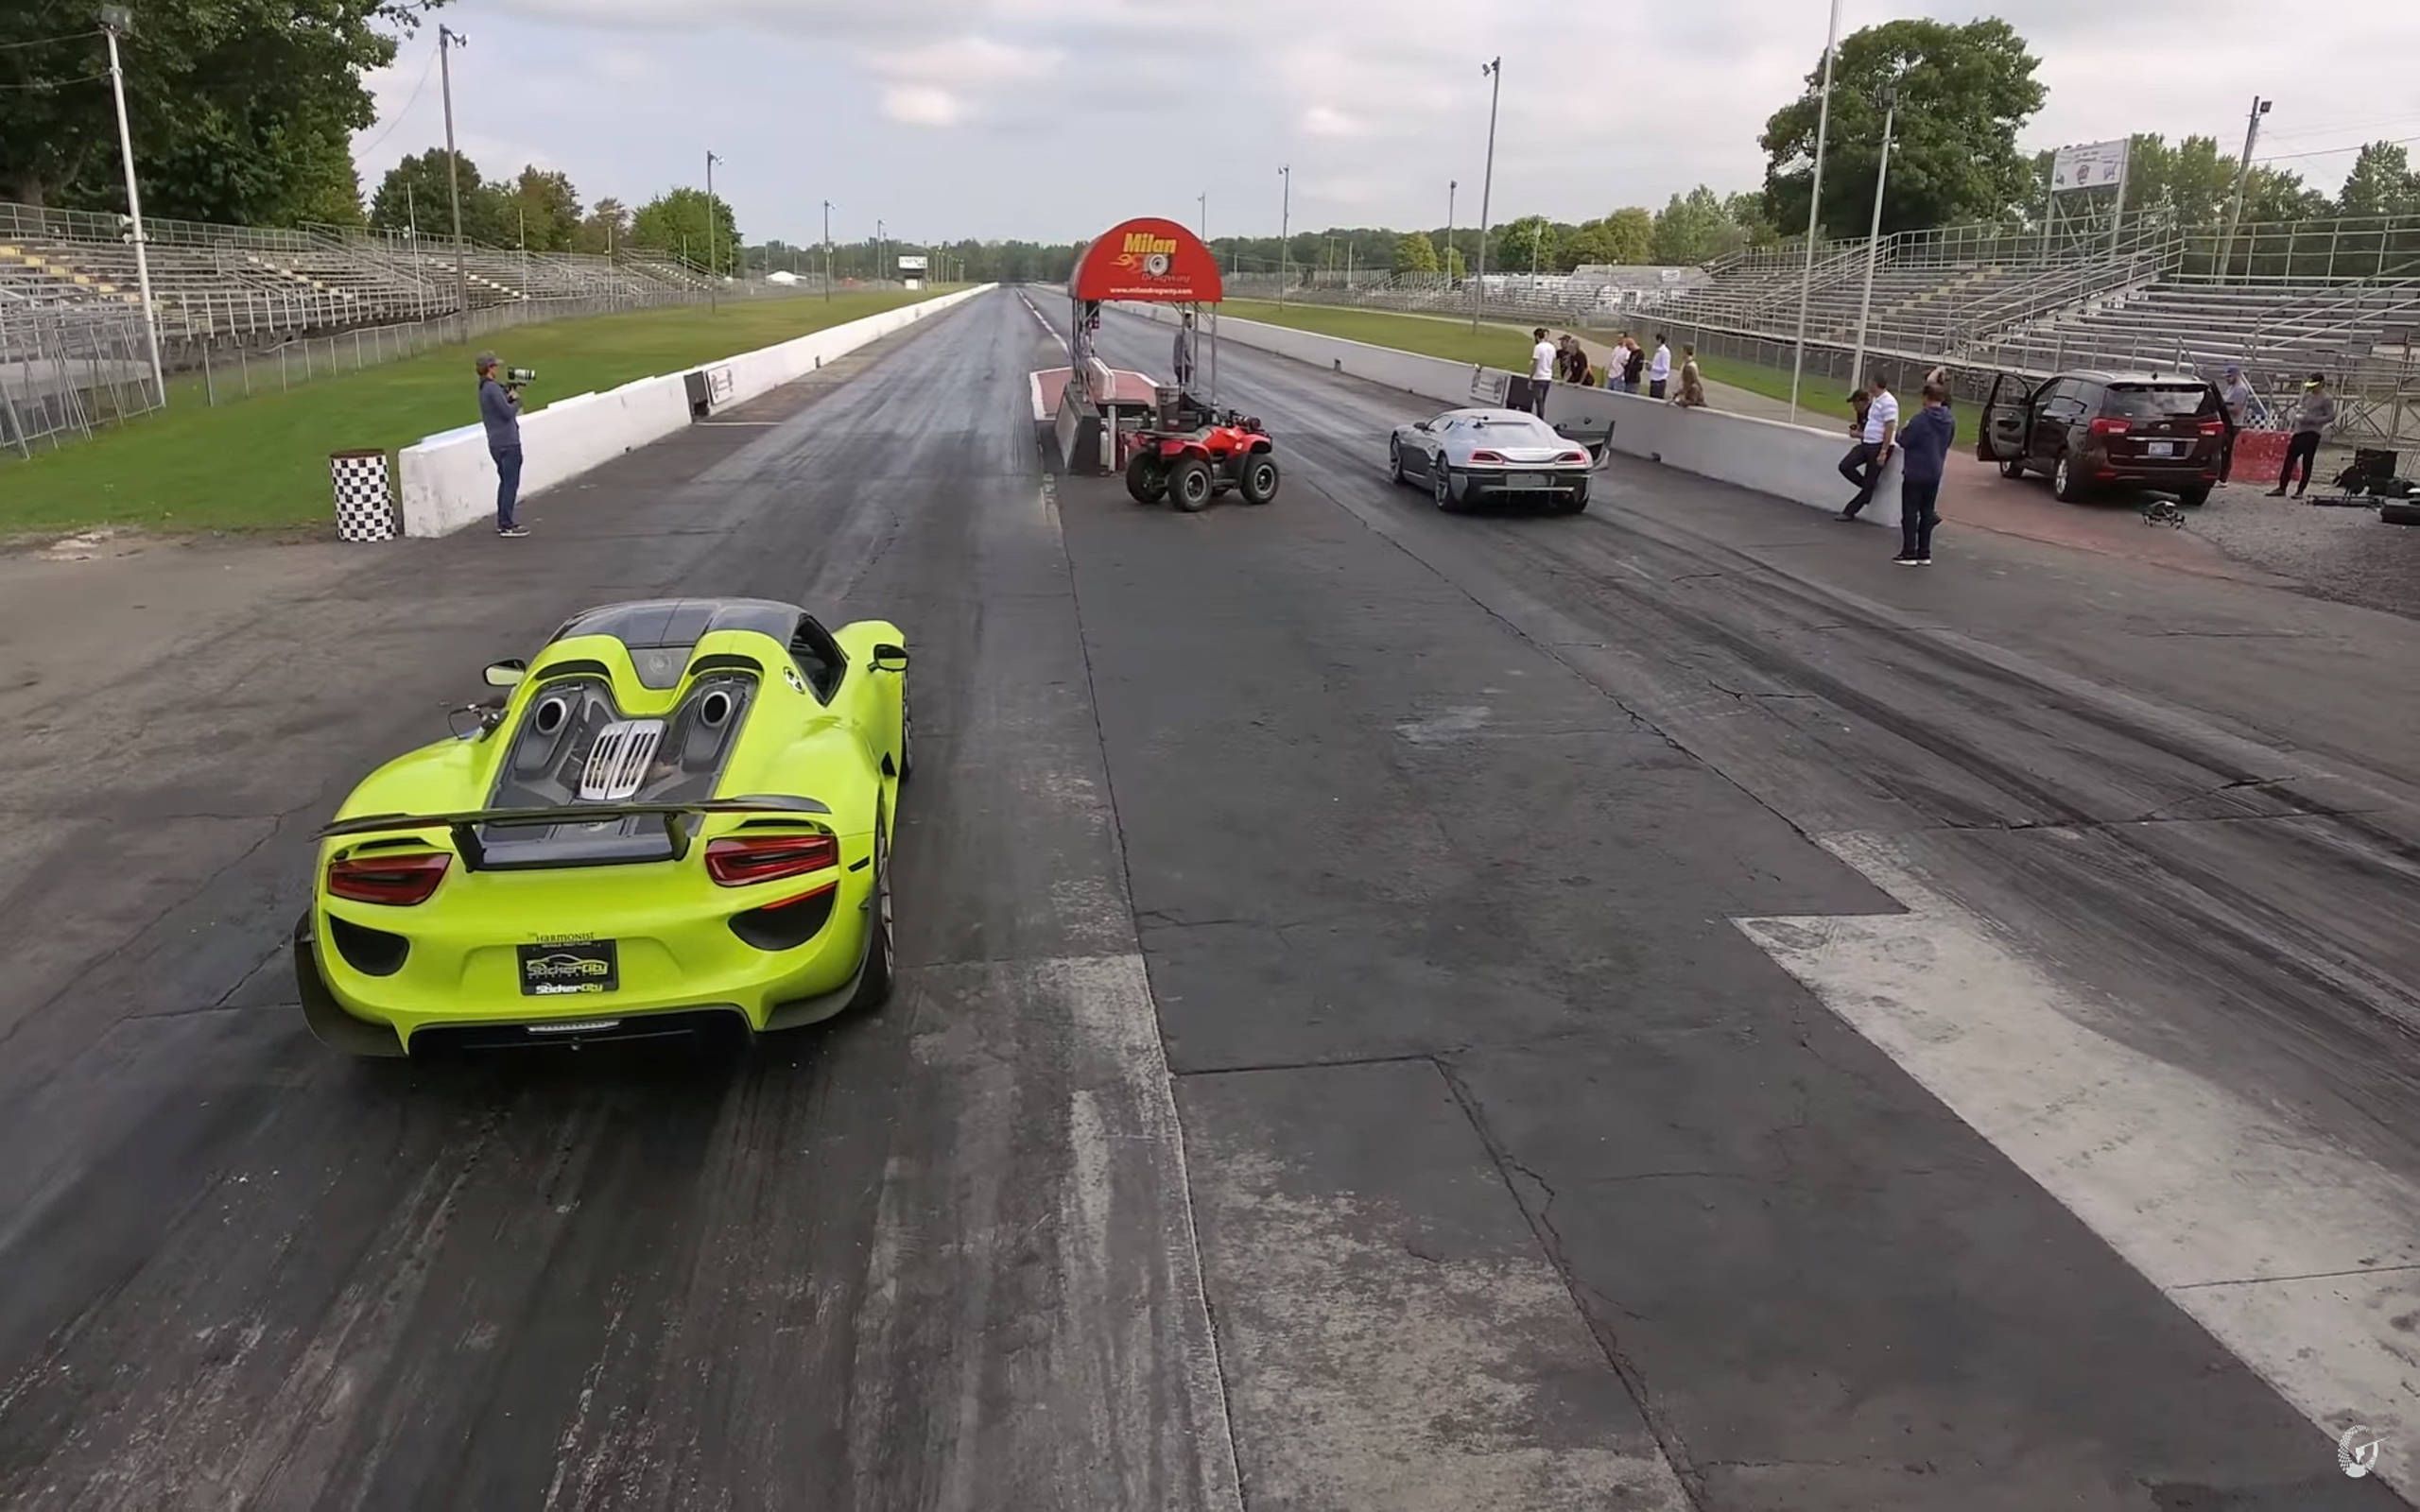 Can Porsche 911 Turbo S Catch Up To 918 Spyder In A Drag Race?